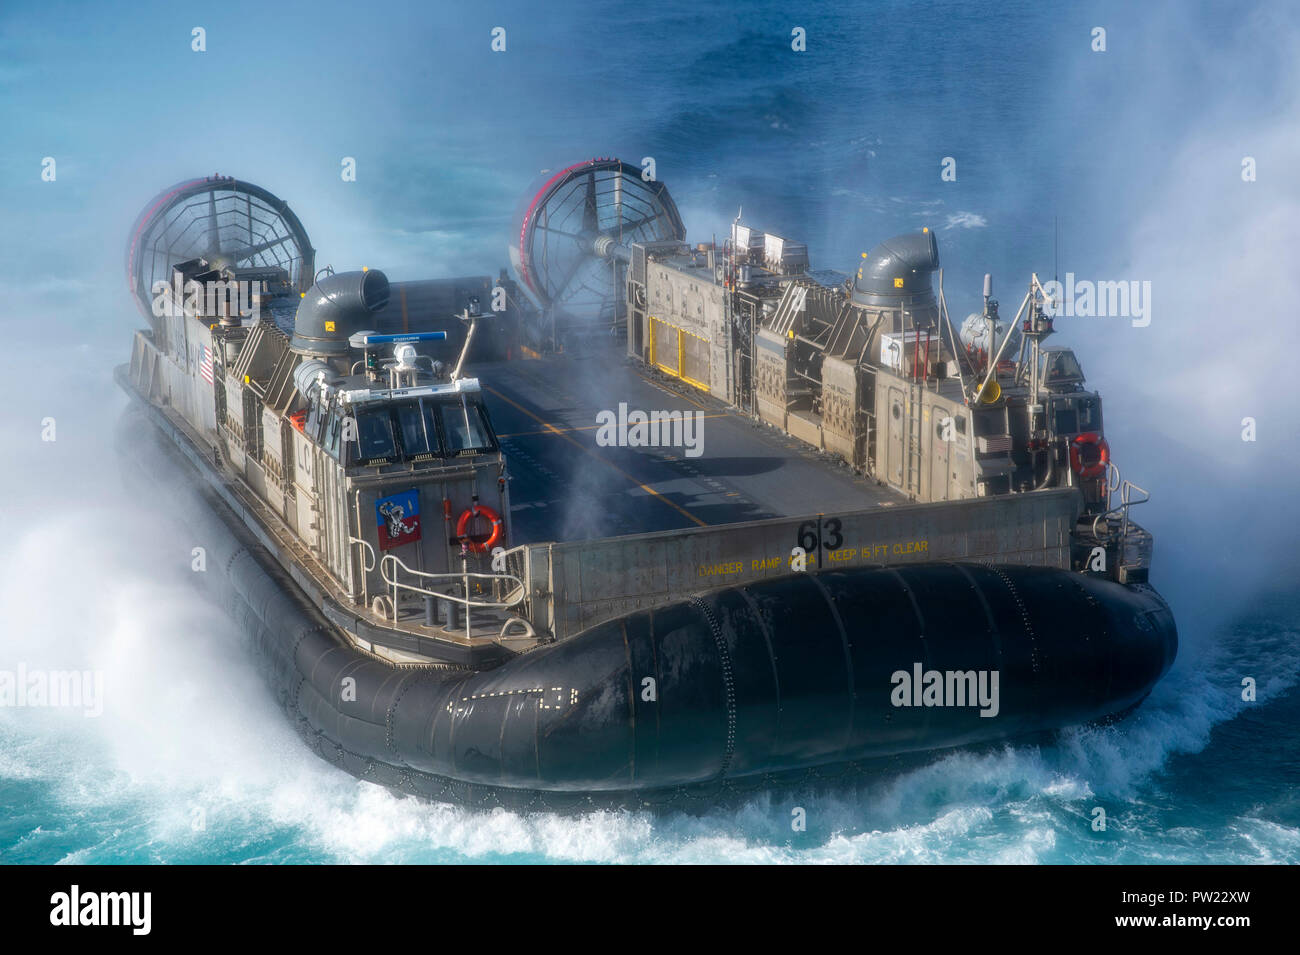 181010-N-DC385-1112 PACIFIC OCEAN (Oct. 10, 2018) Landing craft air cushion (LCAC) 63, assigned to Assault Craft Unit (ACU) 5, approaches the well deck of the amphibious assault ship USS Bonhomme Richard (LHD 6). Bonhomme Richard is operating in the U.S. 3rd Fleet area of operations. (U.S. Navy photo by Mass Communication Specialist 3rd Class Cosmo Walrath) Stock Photo